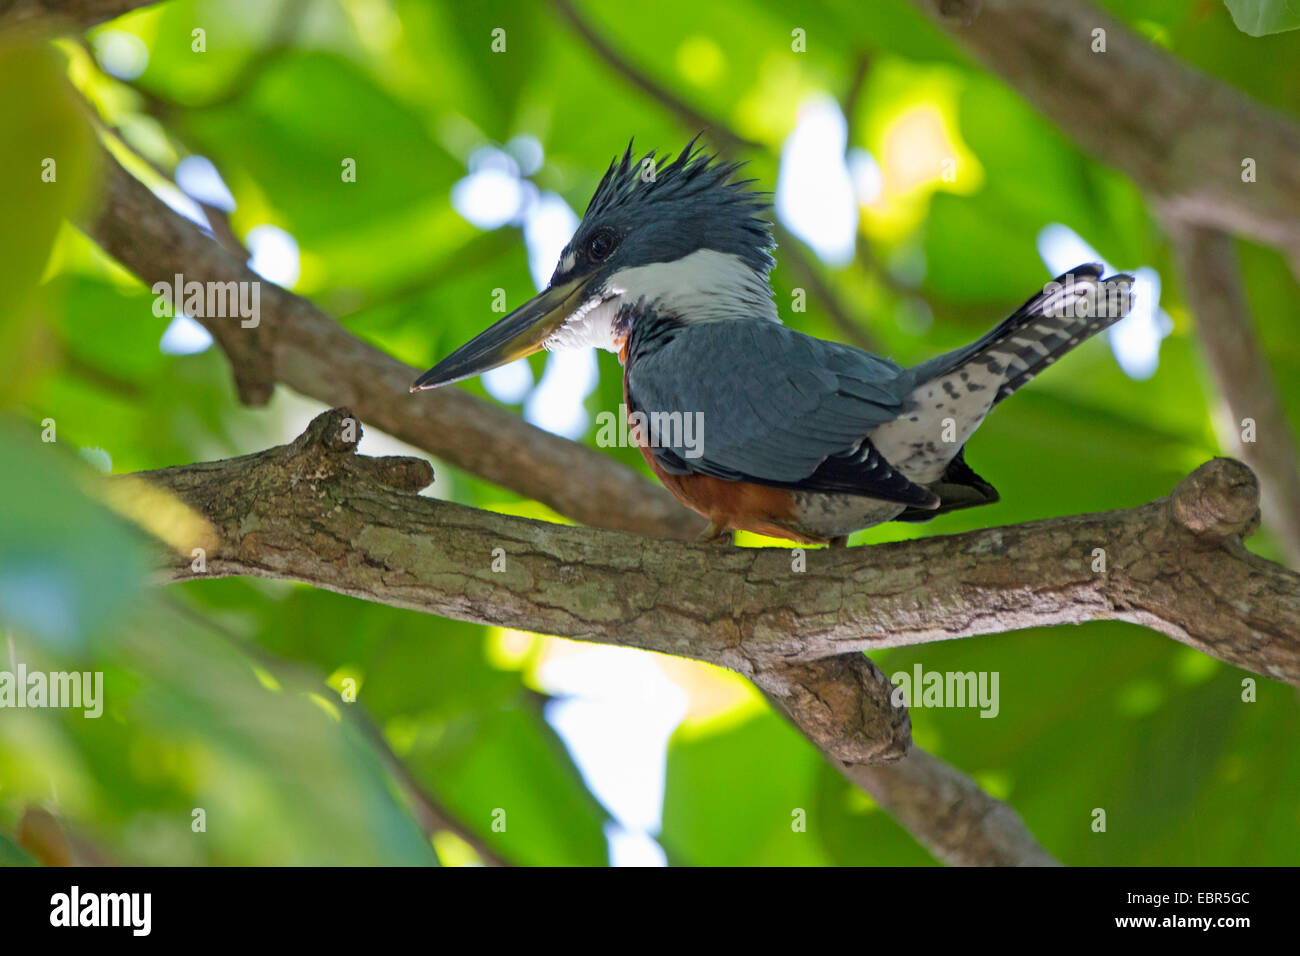 ringed kingfisher (Megaceryle torquata), sitting on a branch in a leaved tree, Costa Rica Stock Photo